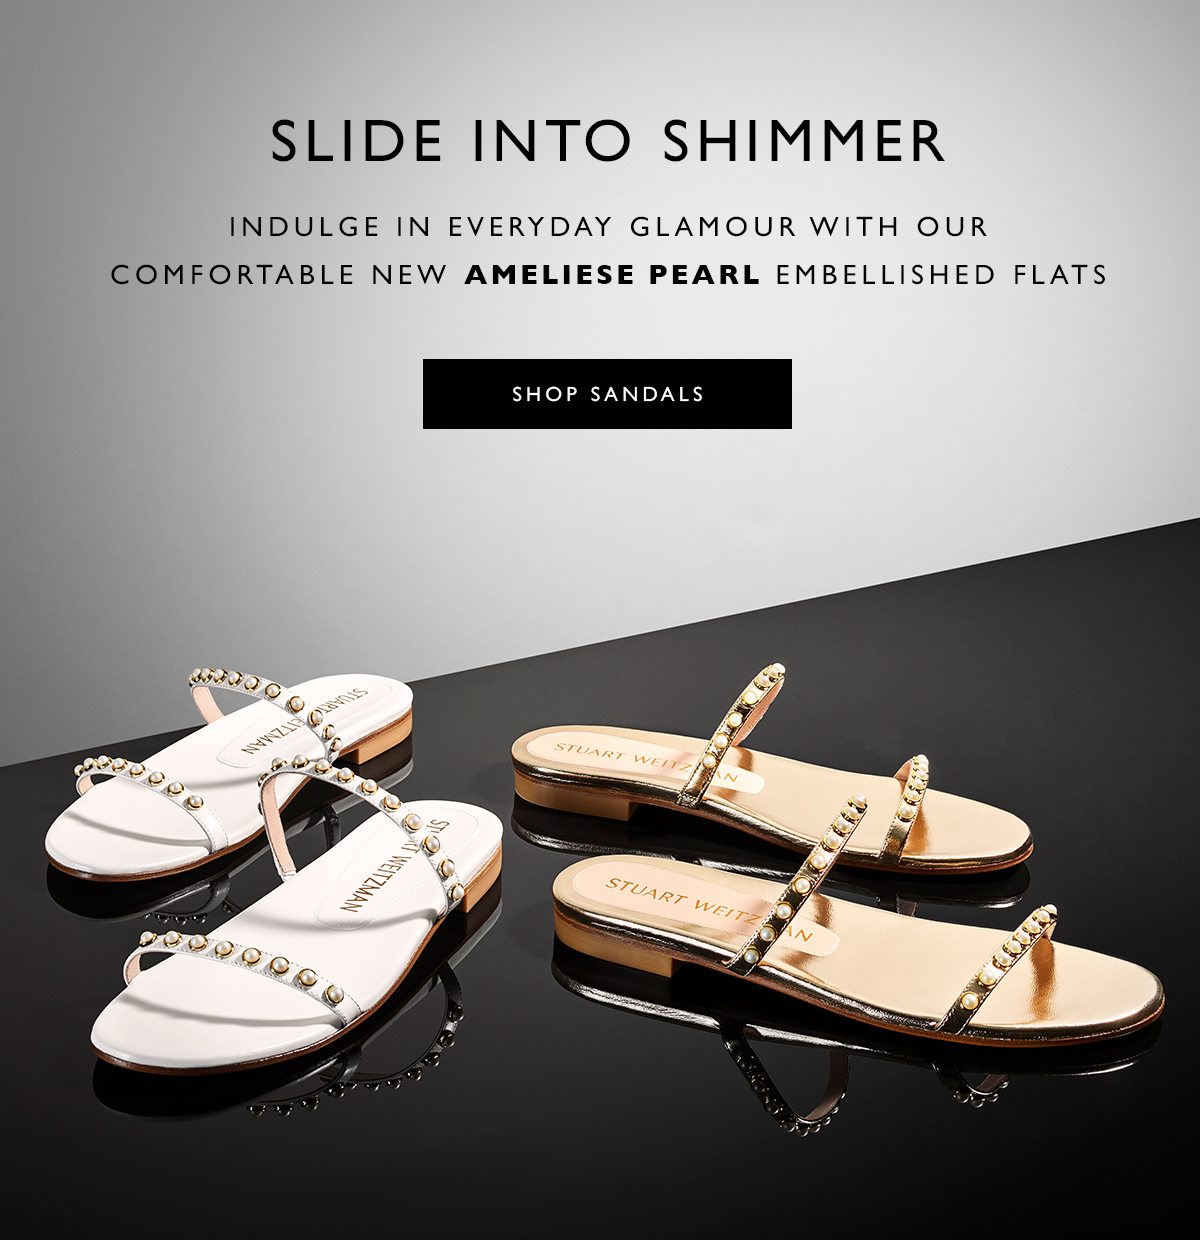 Slide Into Shimmer. Indulge in everyday glamour with our comfortable new AMELIESE PEARL embellished flats. SHOP SANDALS